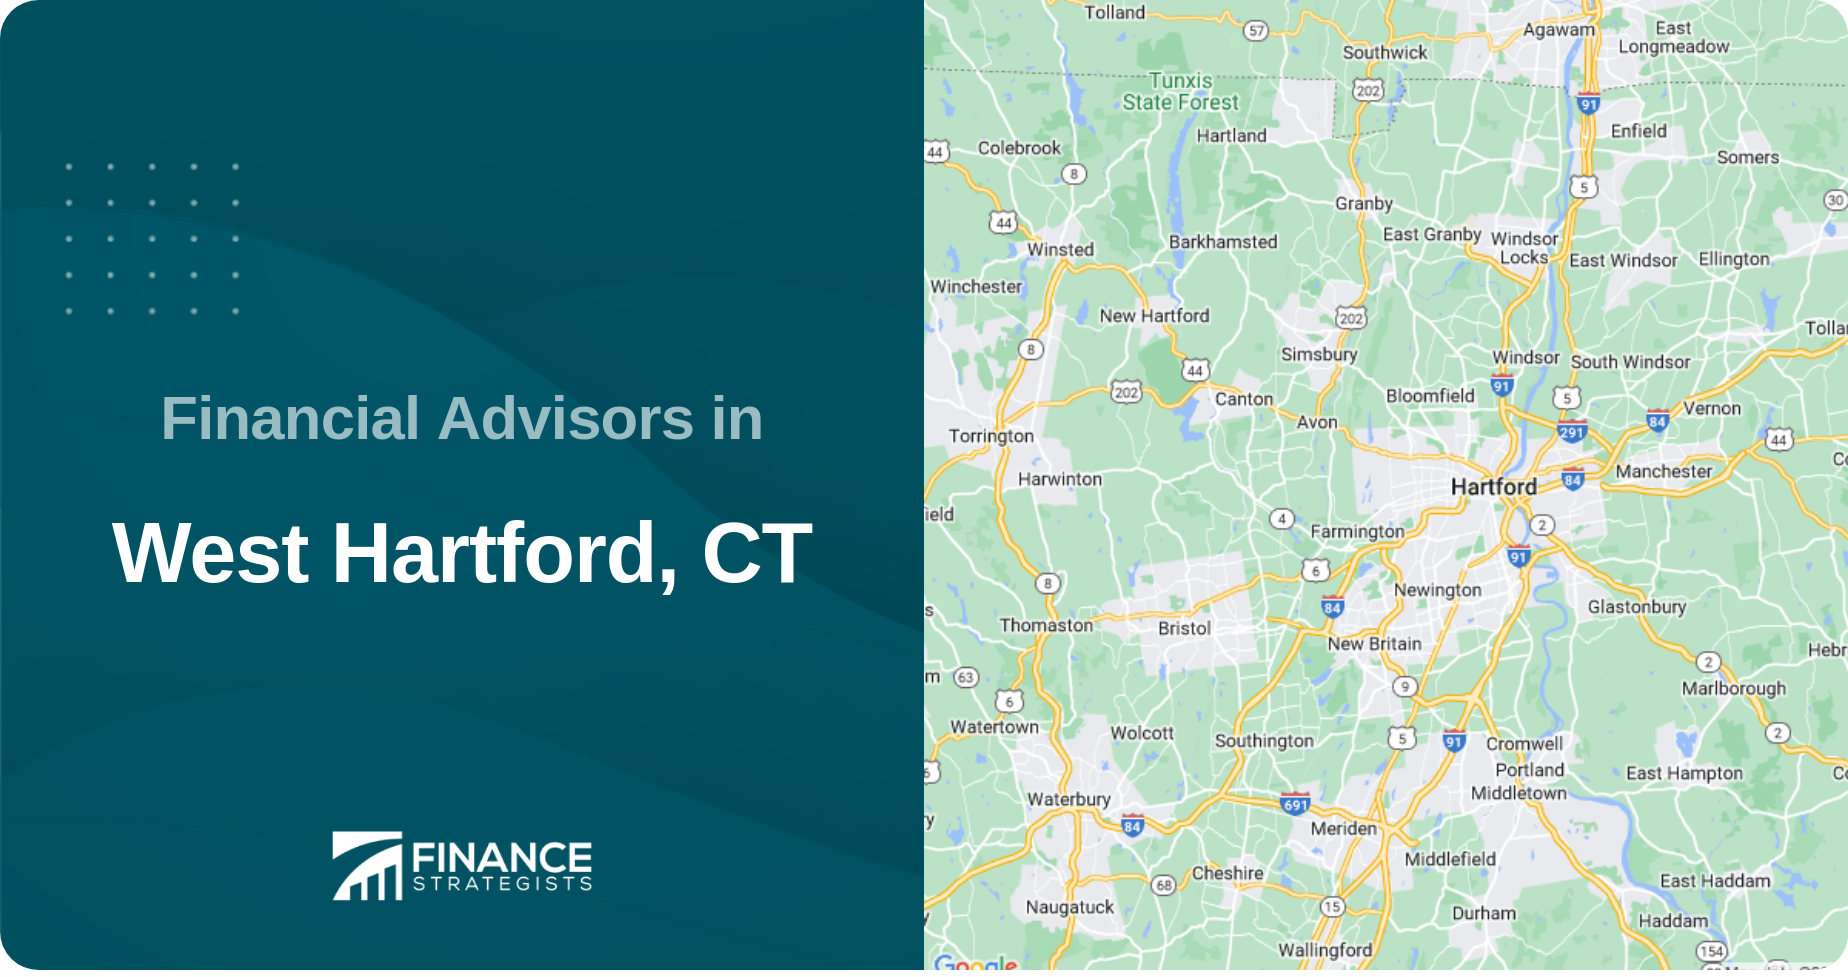 Financial Advisors in West Hartford, CT